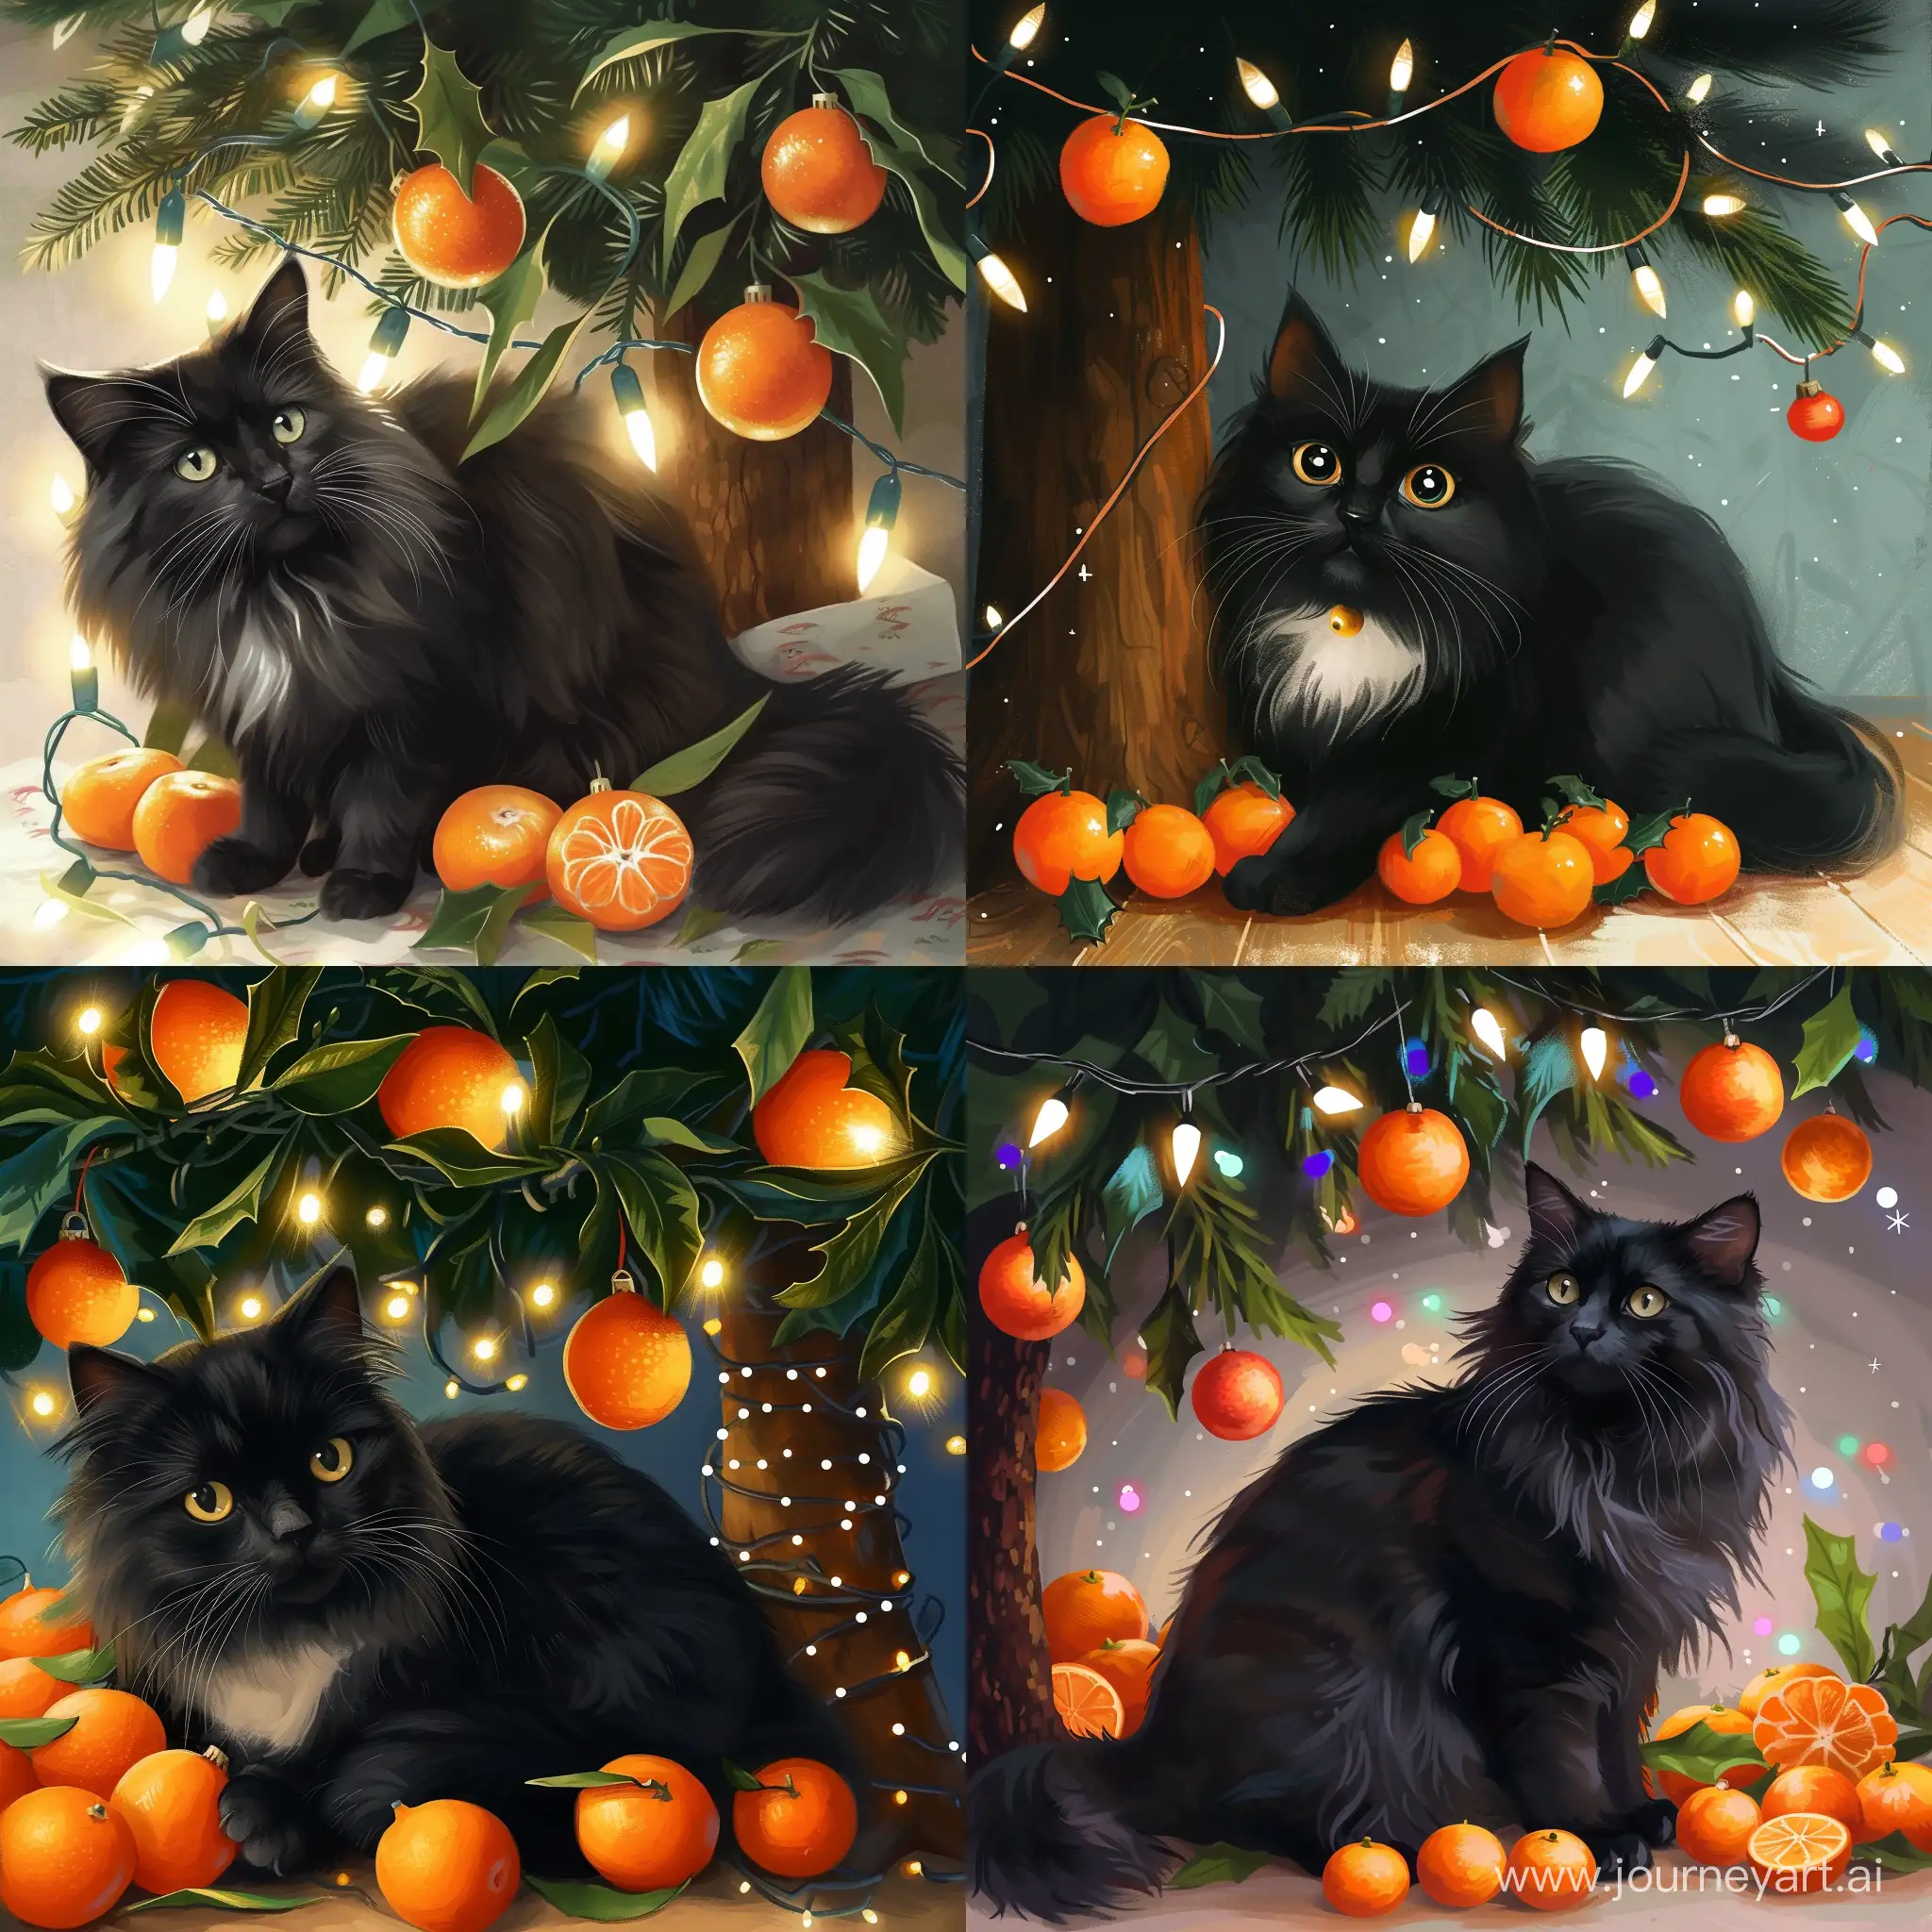 Adorable-Black-Fluffy-Cat-Under-Christmas-Tree-with-Tangerines-and-Lights